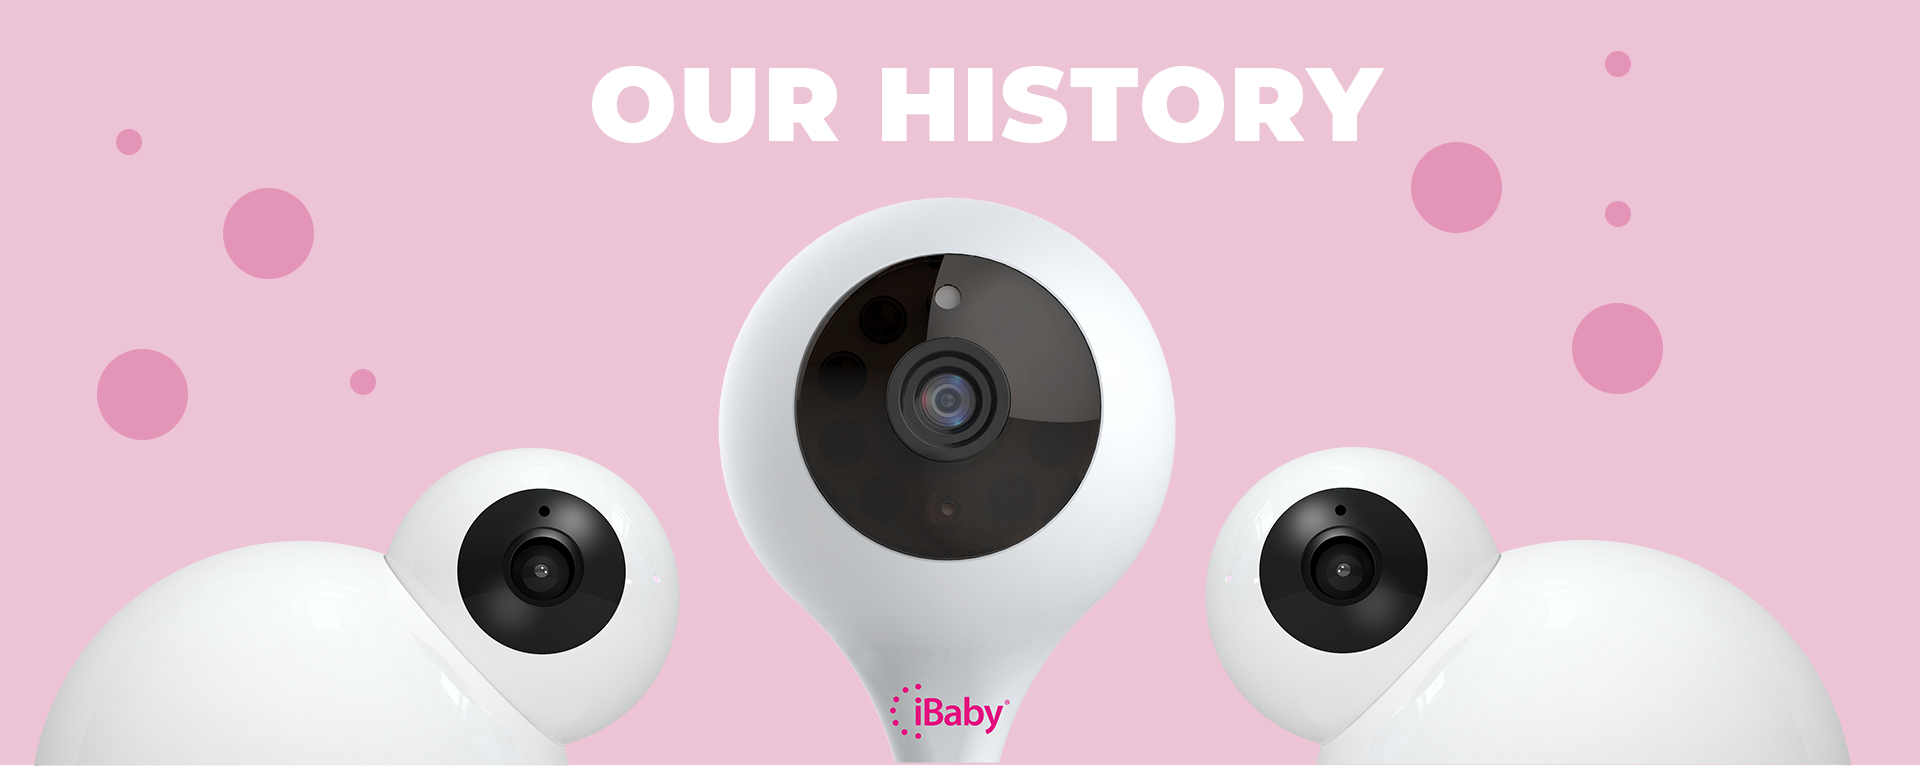 iBaby History Banner